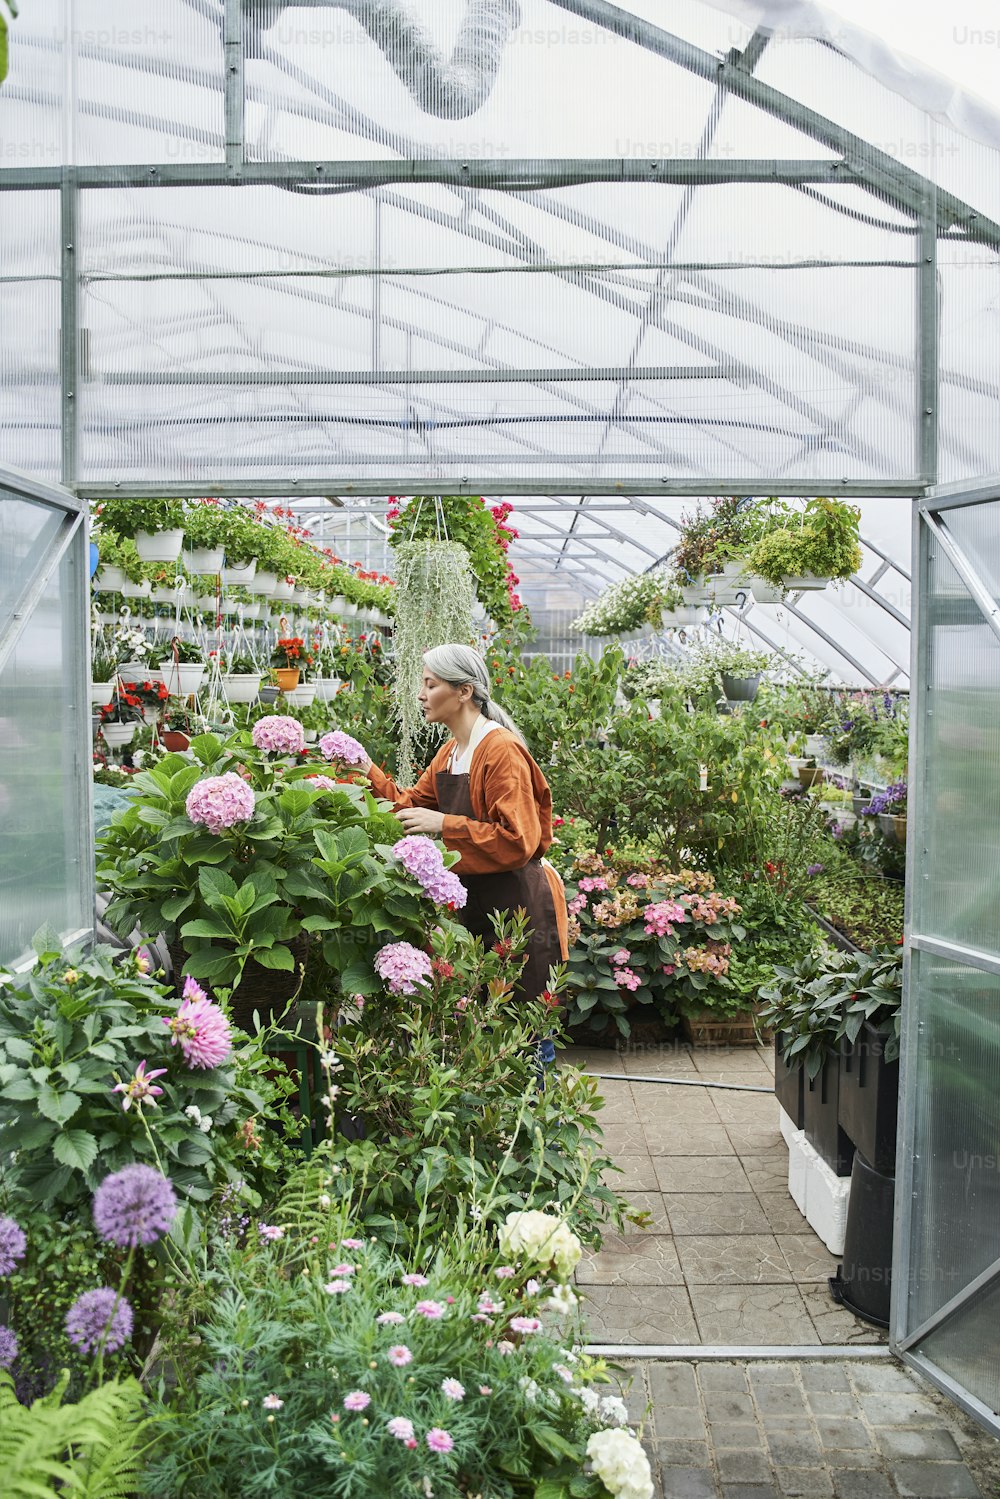 Full length view of the senior calm gardener in apron holding small scoop and watering spray while taking care of her plants at the greenhouse. Stock photo